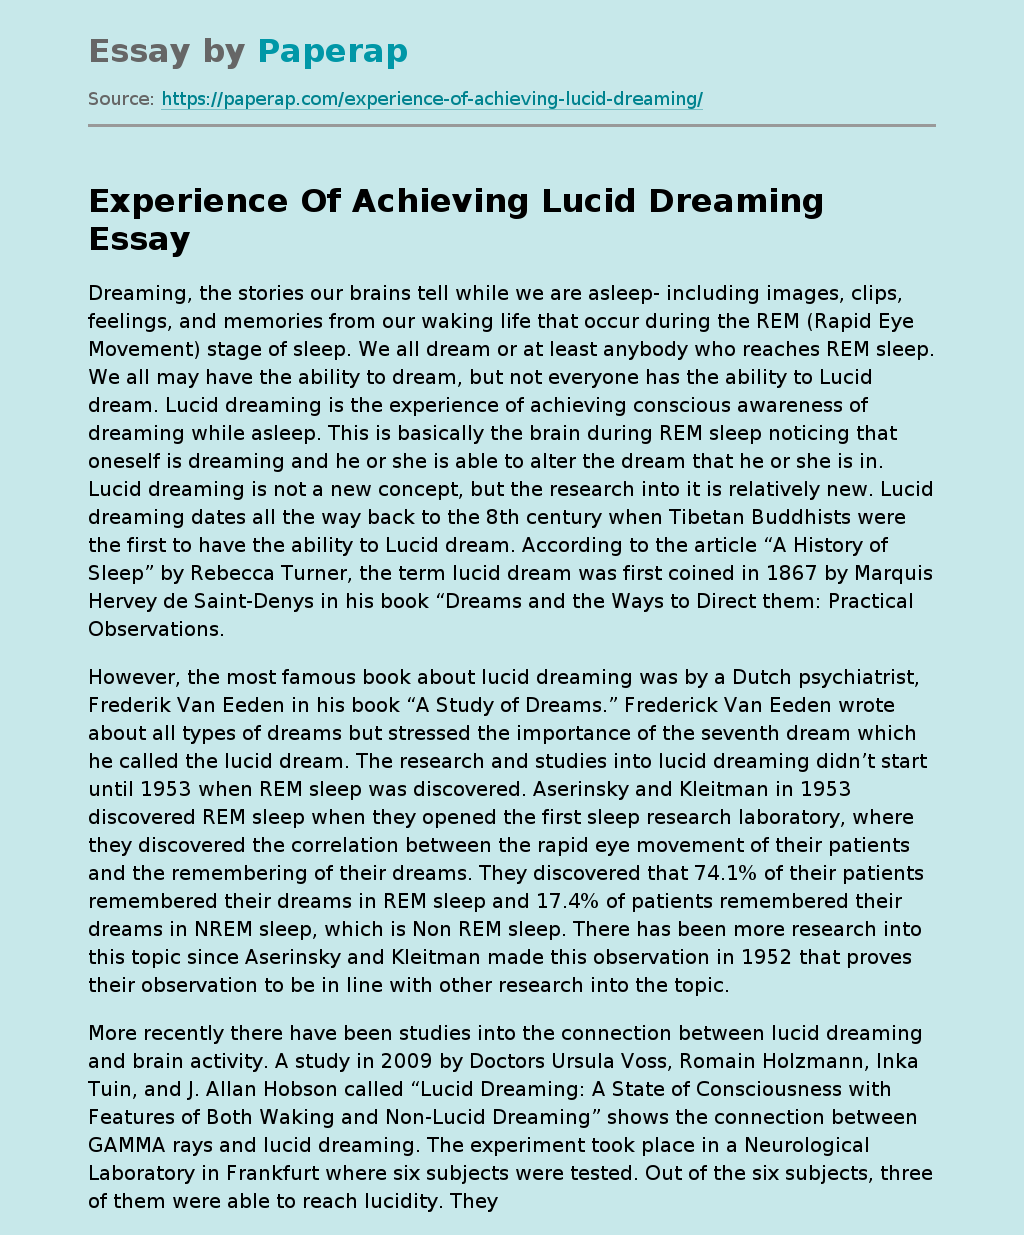 Experience Of Achieving Lucid Dreaming